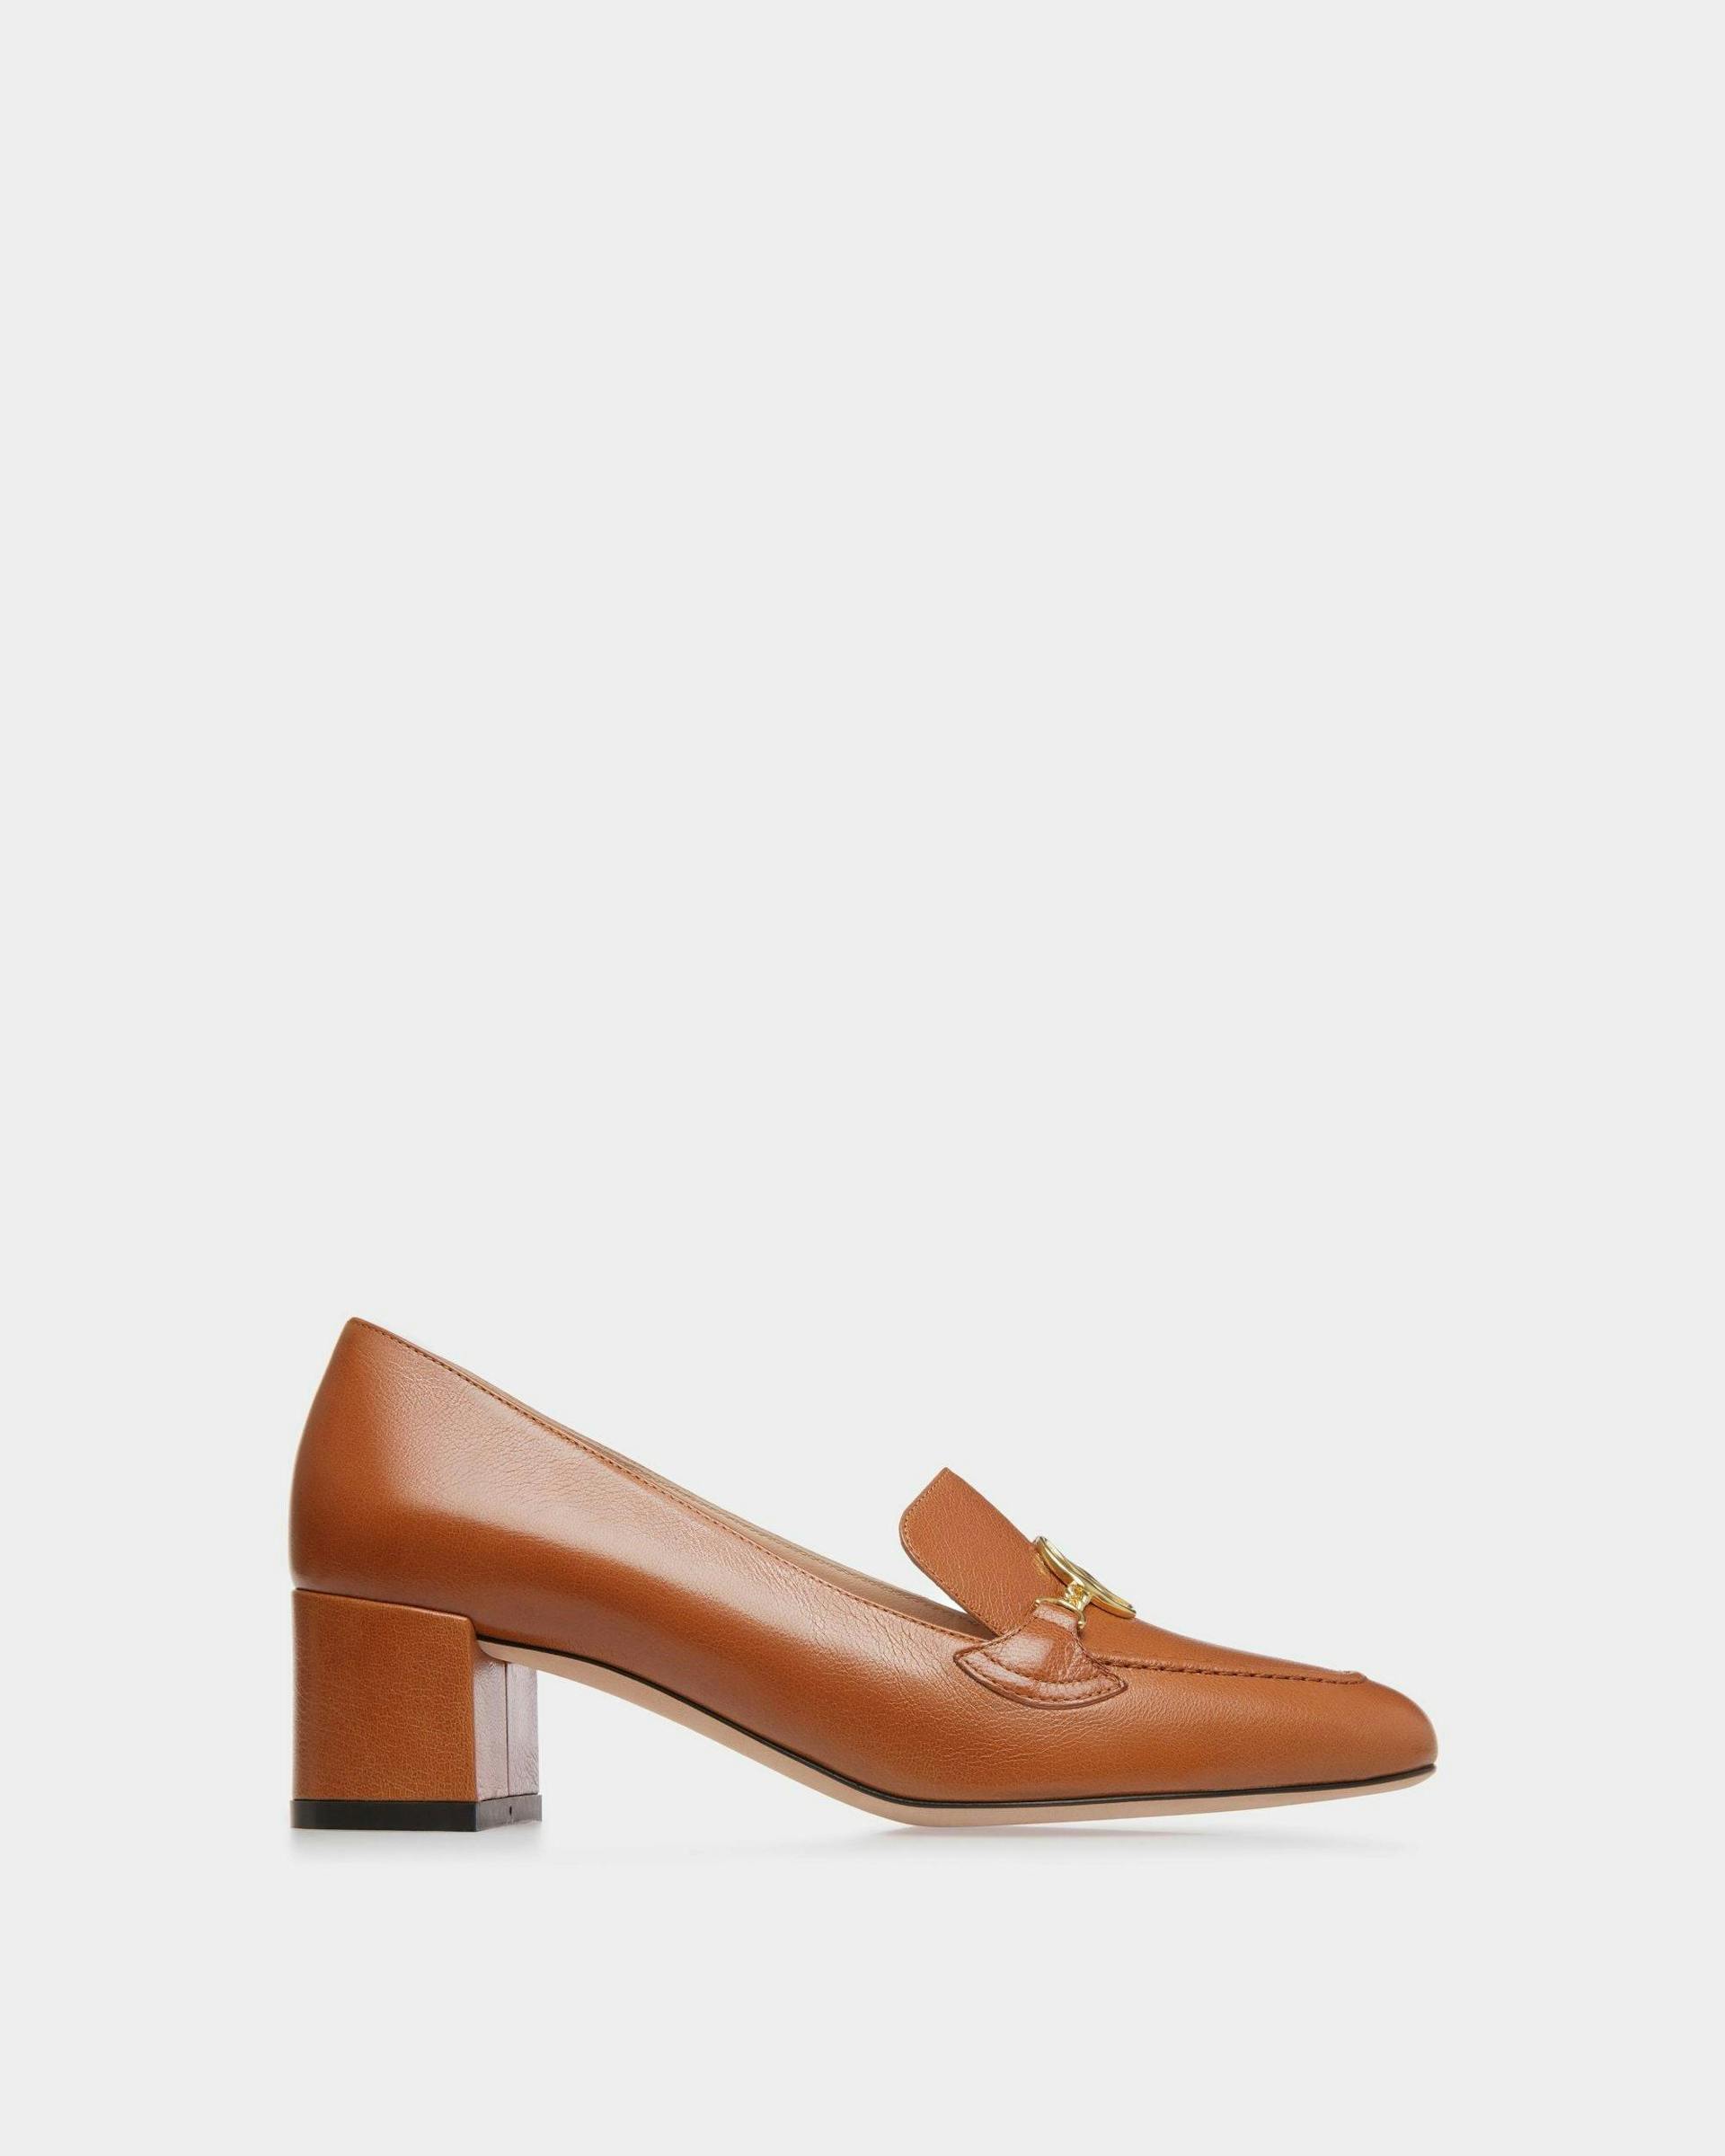 Emblem Pumps In Brown Leather - Women's - Bally - 01